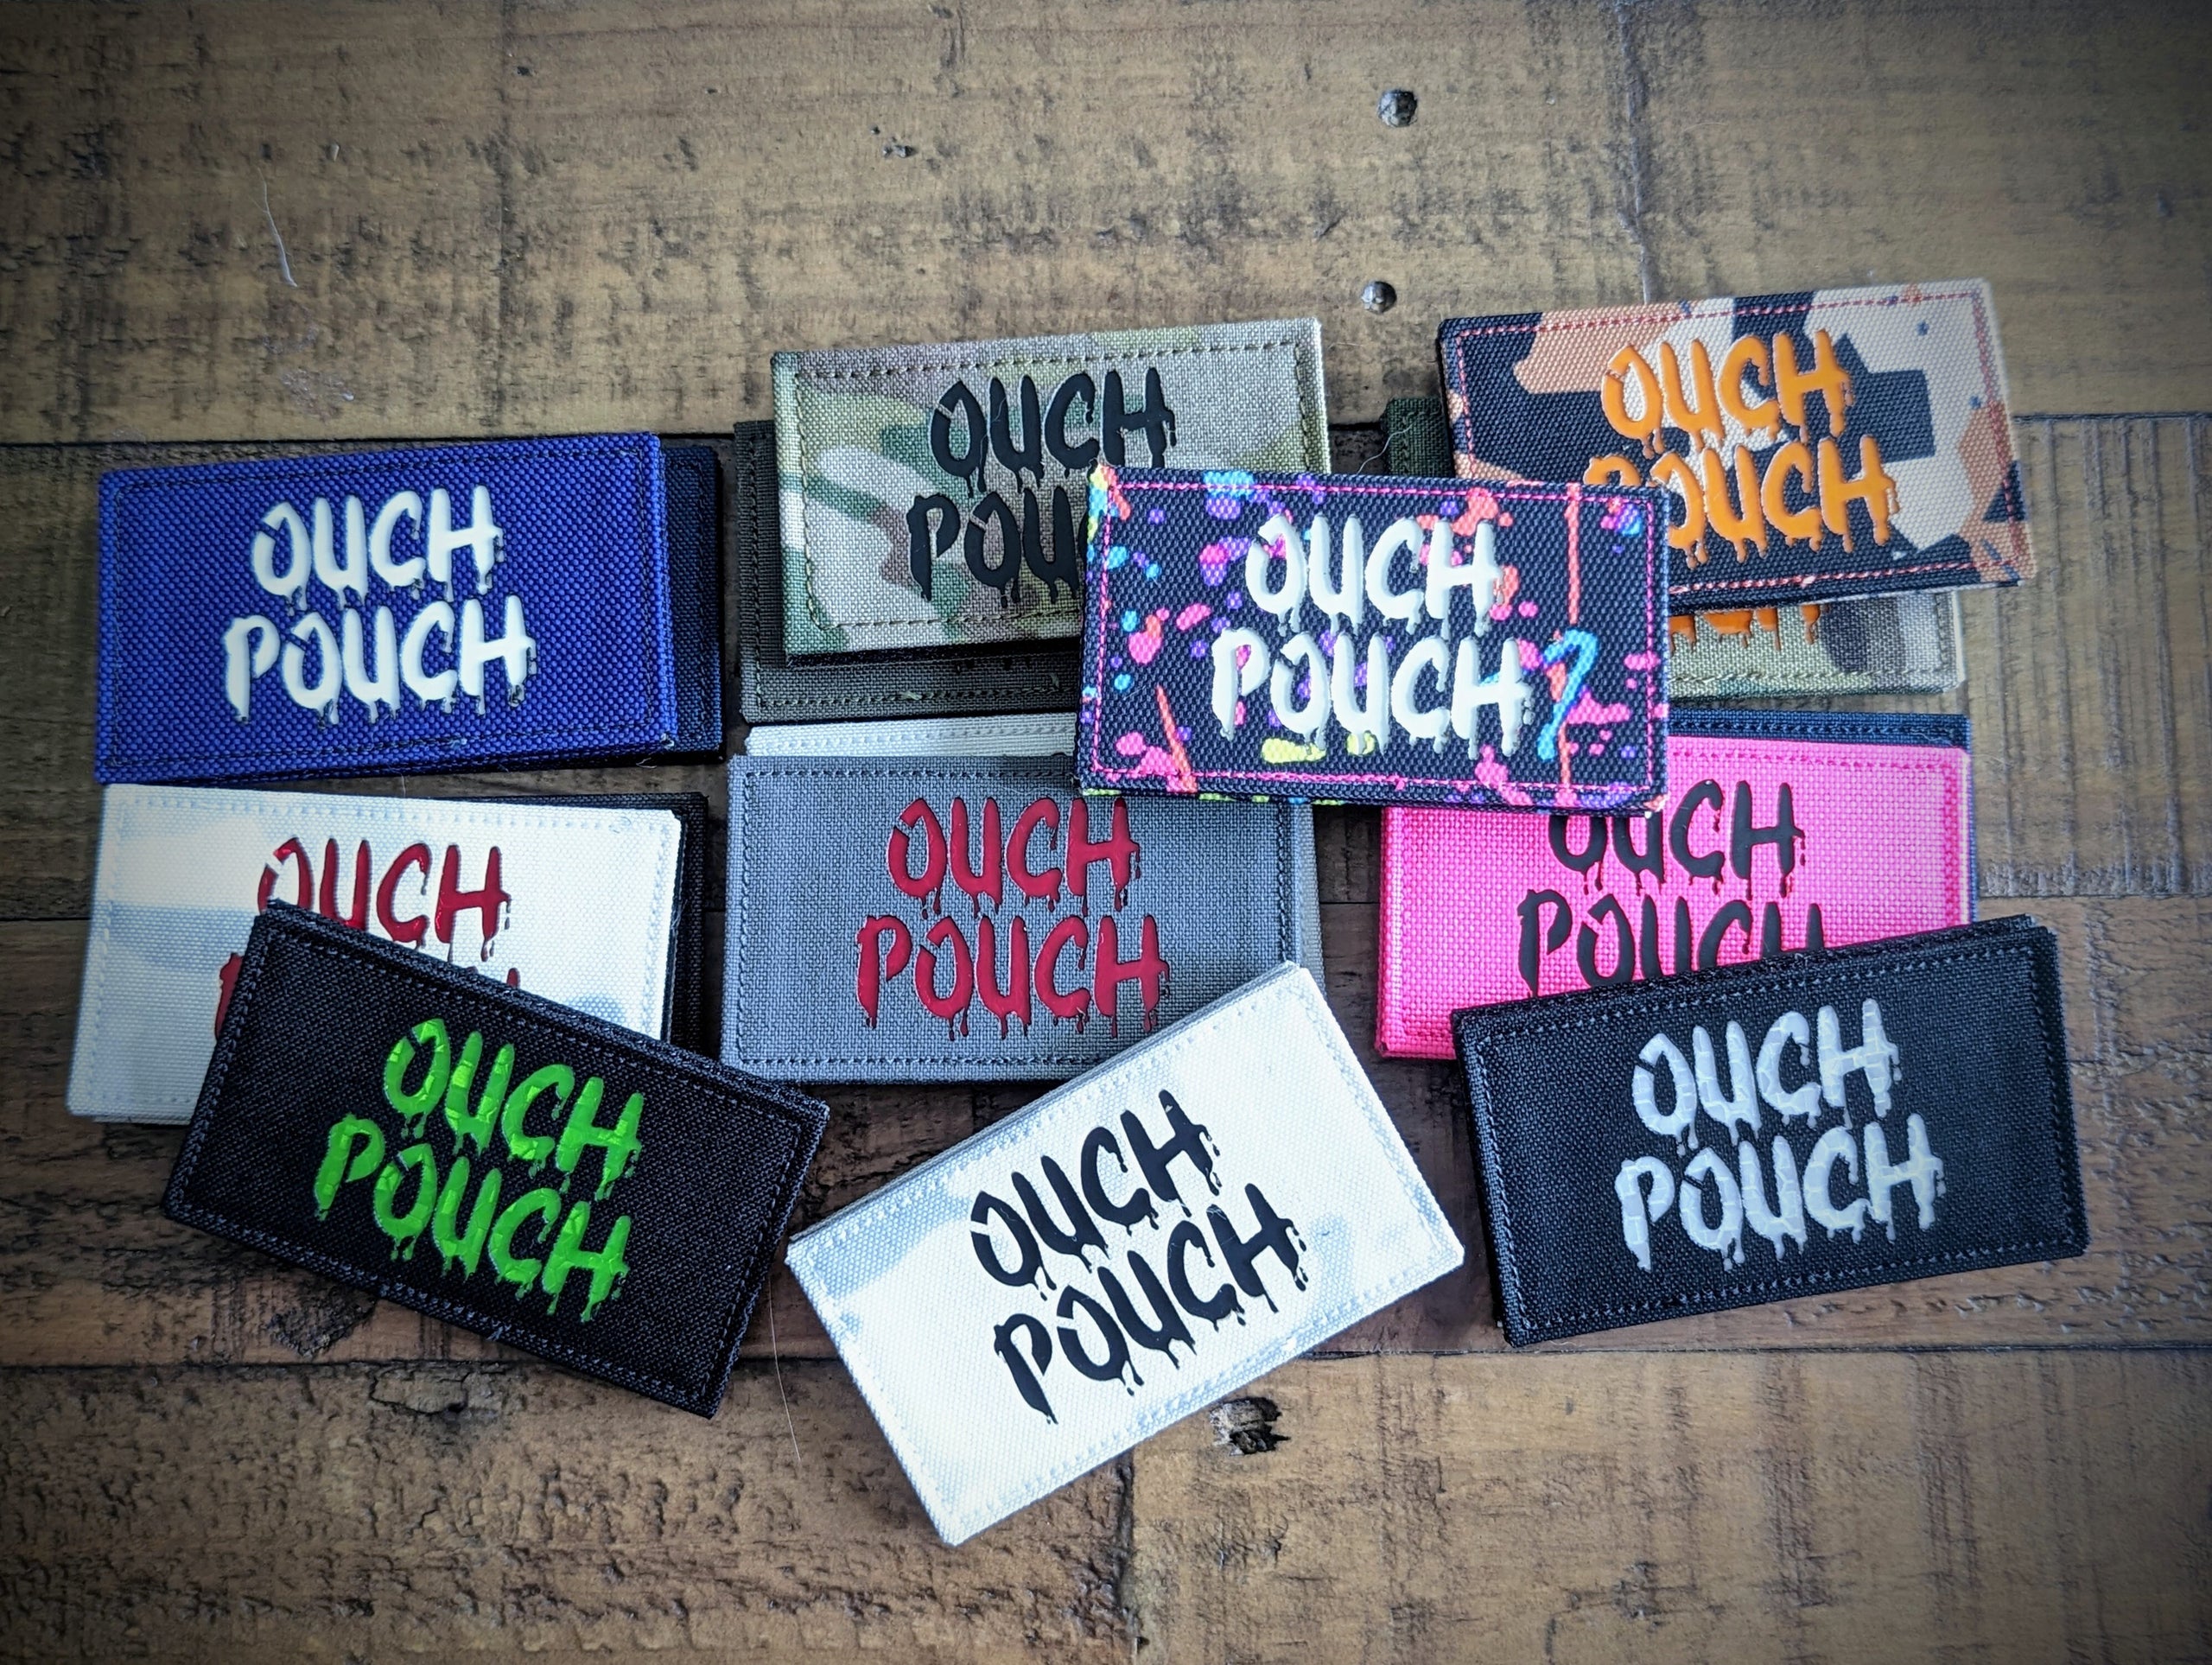  Ouch Pouch - 2x3 Patch - Black